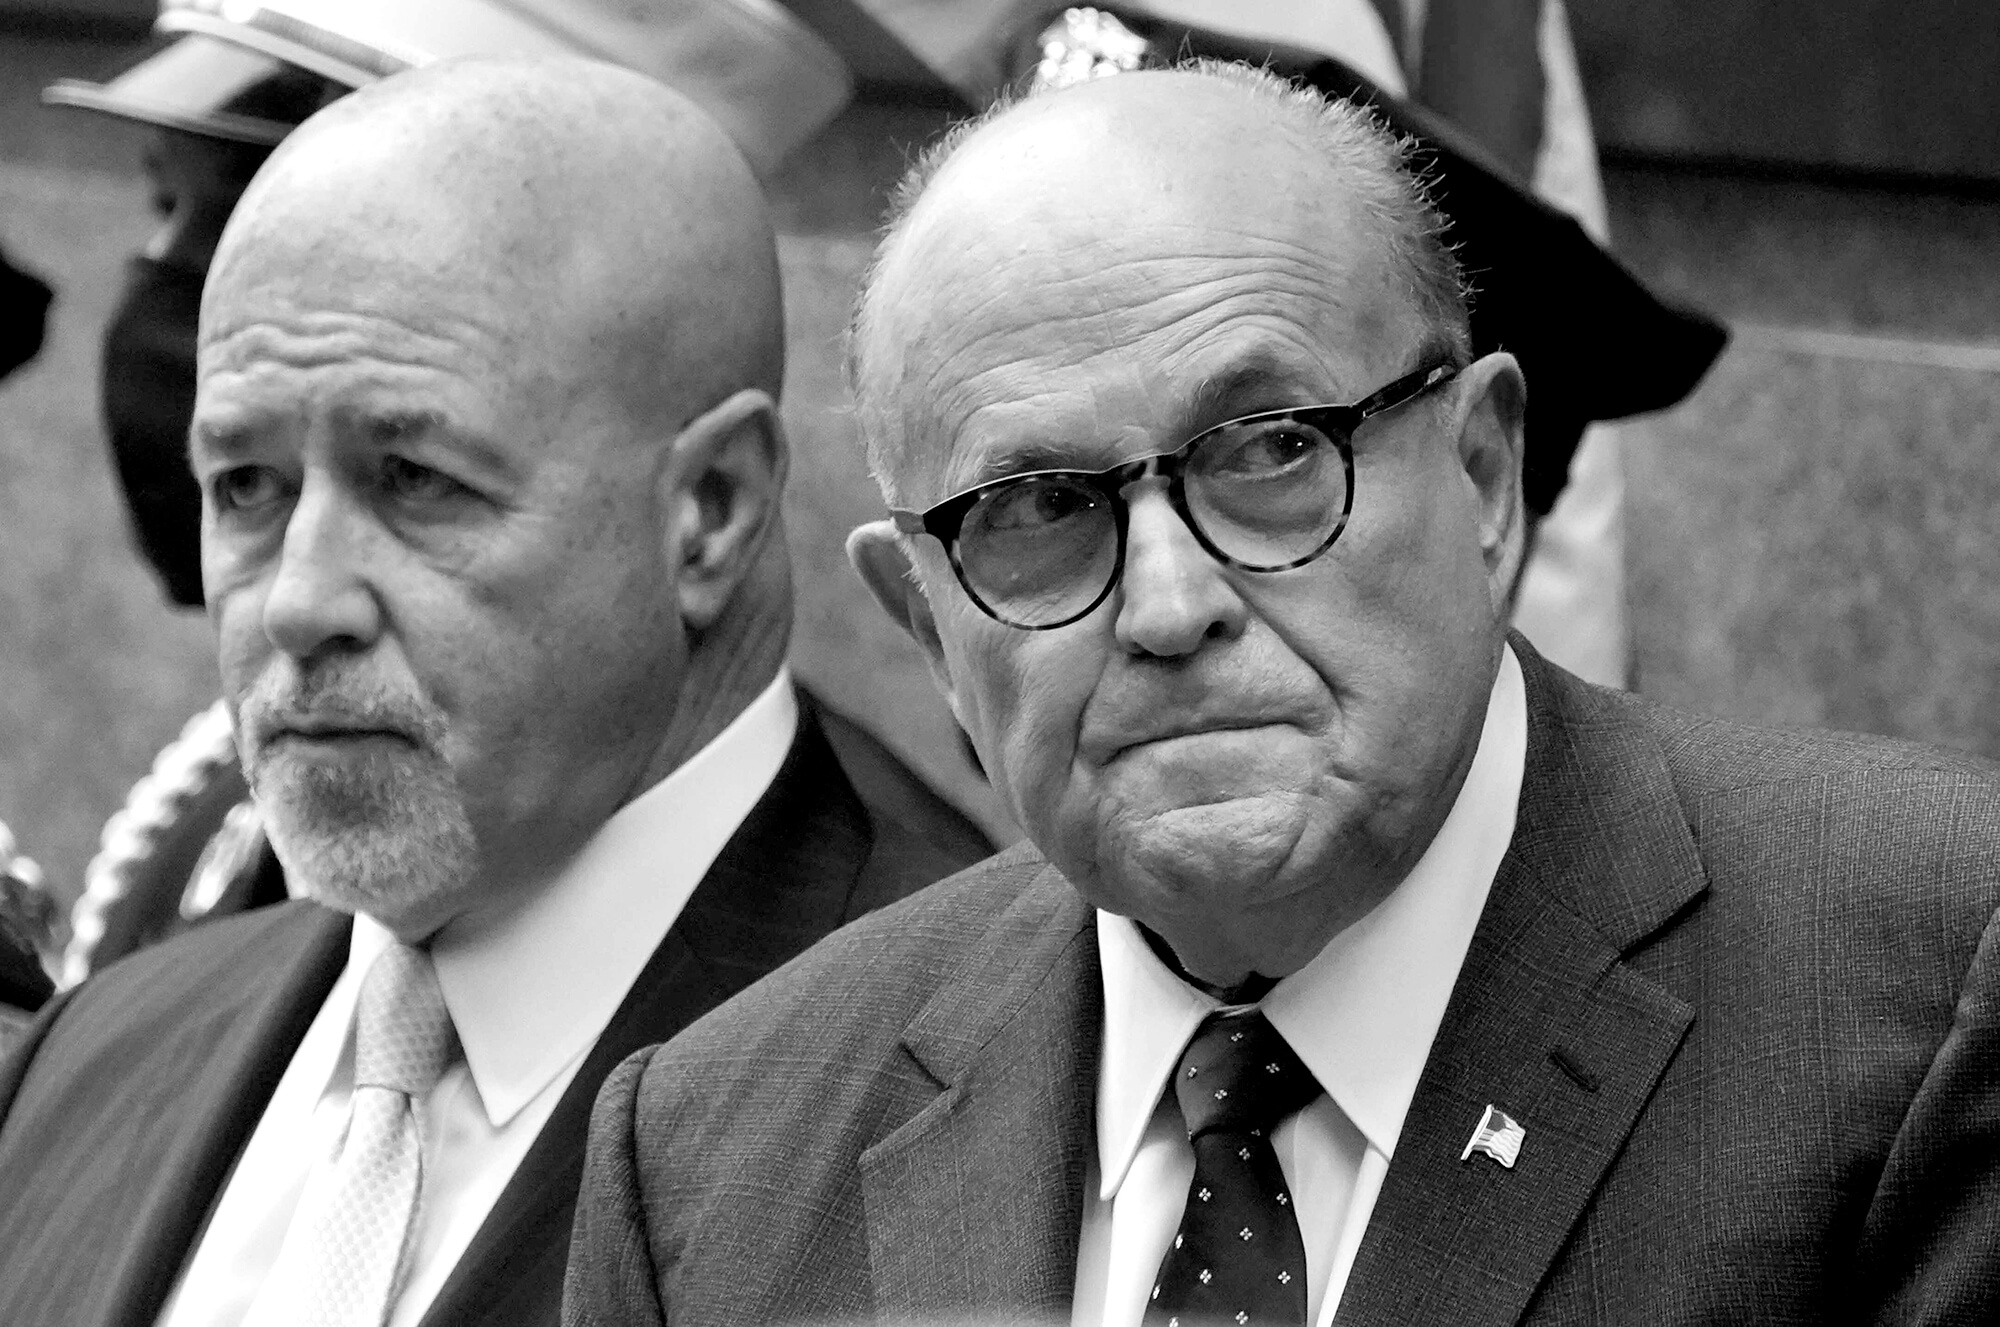 Donald Trump pardoned a longtime friend of his personal lawyer Rudy Giuliani, the former New York City Police Commissioner Bernard Kerik (left), for felony convictions. Future presidents might use the pardon power to even more detrimental effect to shield themselves and their inner circle from those who could testify to their misdeeds or crimes.